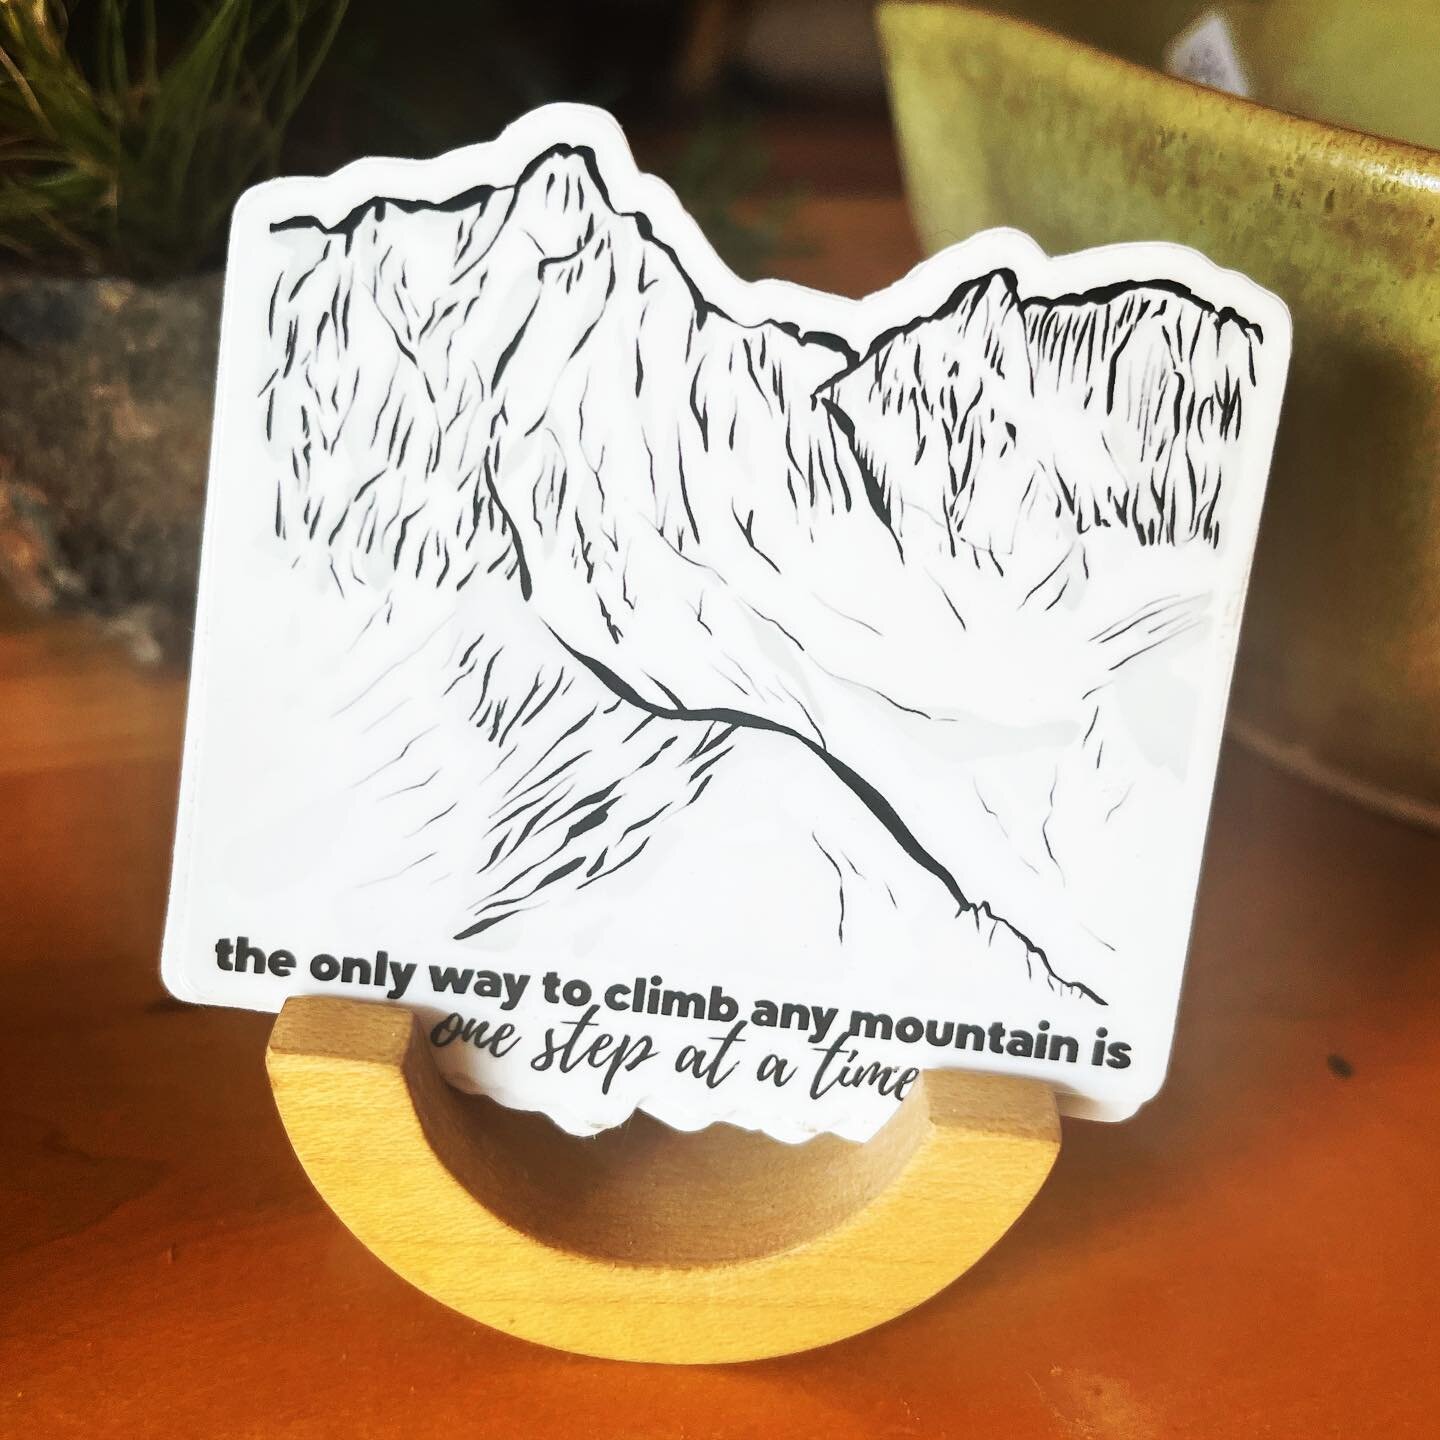 The only way to accomplish anything, whether climbing a mountain, finishing school, launching a business, or any other goal you may have, is taking it one step at a time.

This die-cut sticker was inspired by all of the literal and metaphorical mount